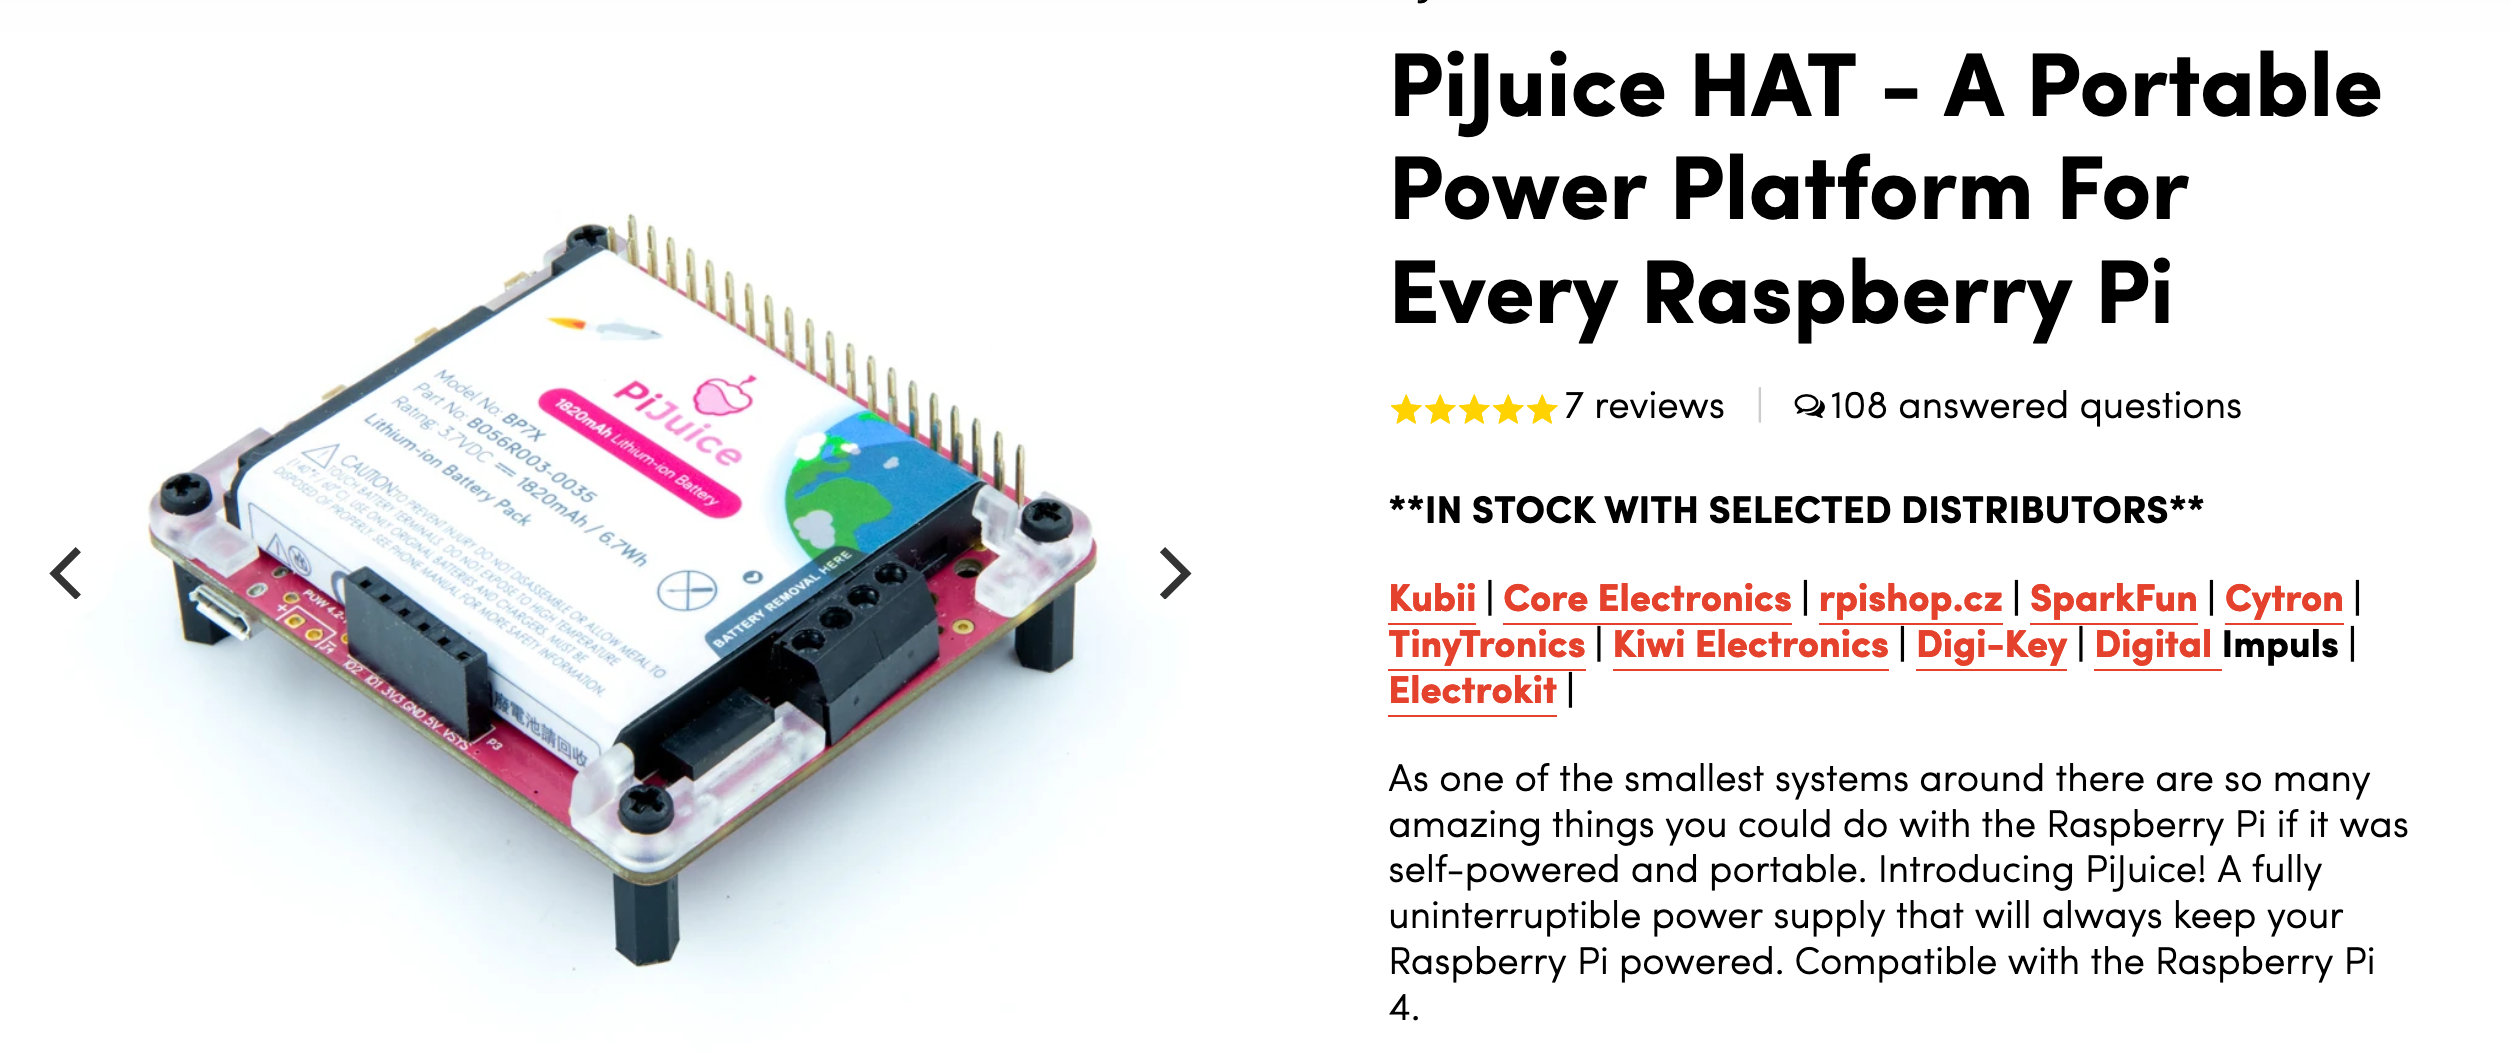 A screenshot of a RaspberryPi PiJuice HAT next to product information